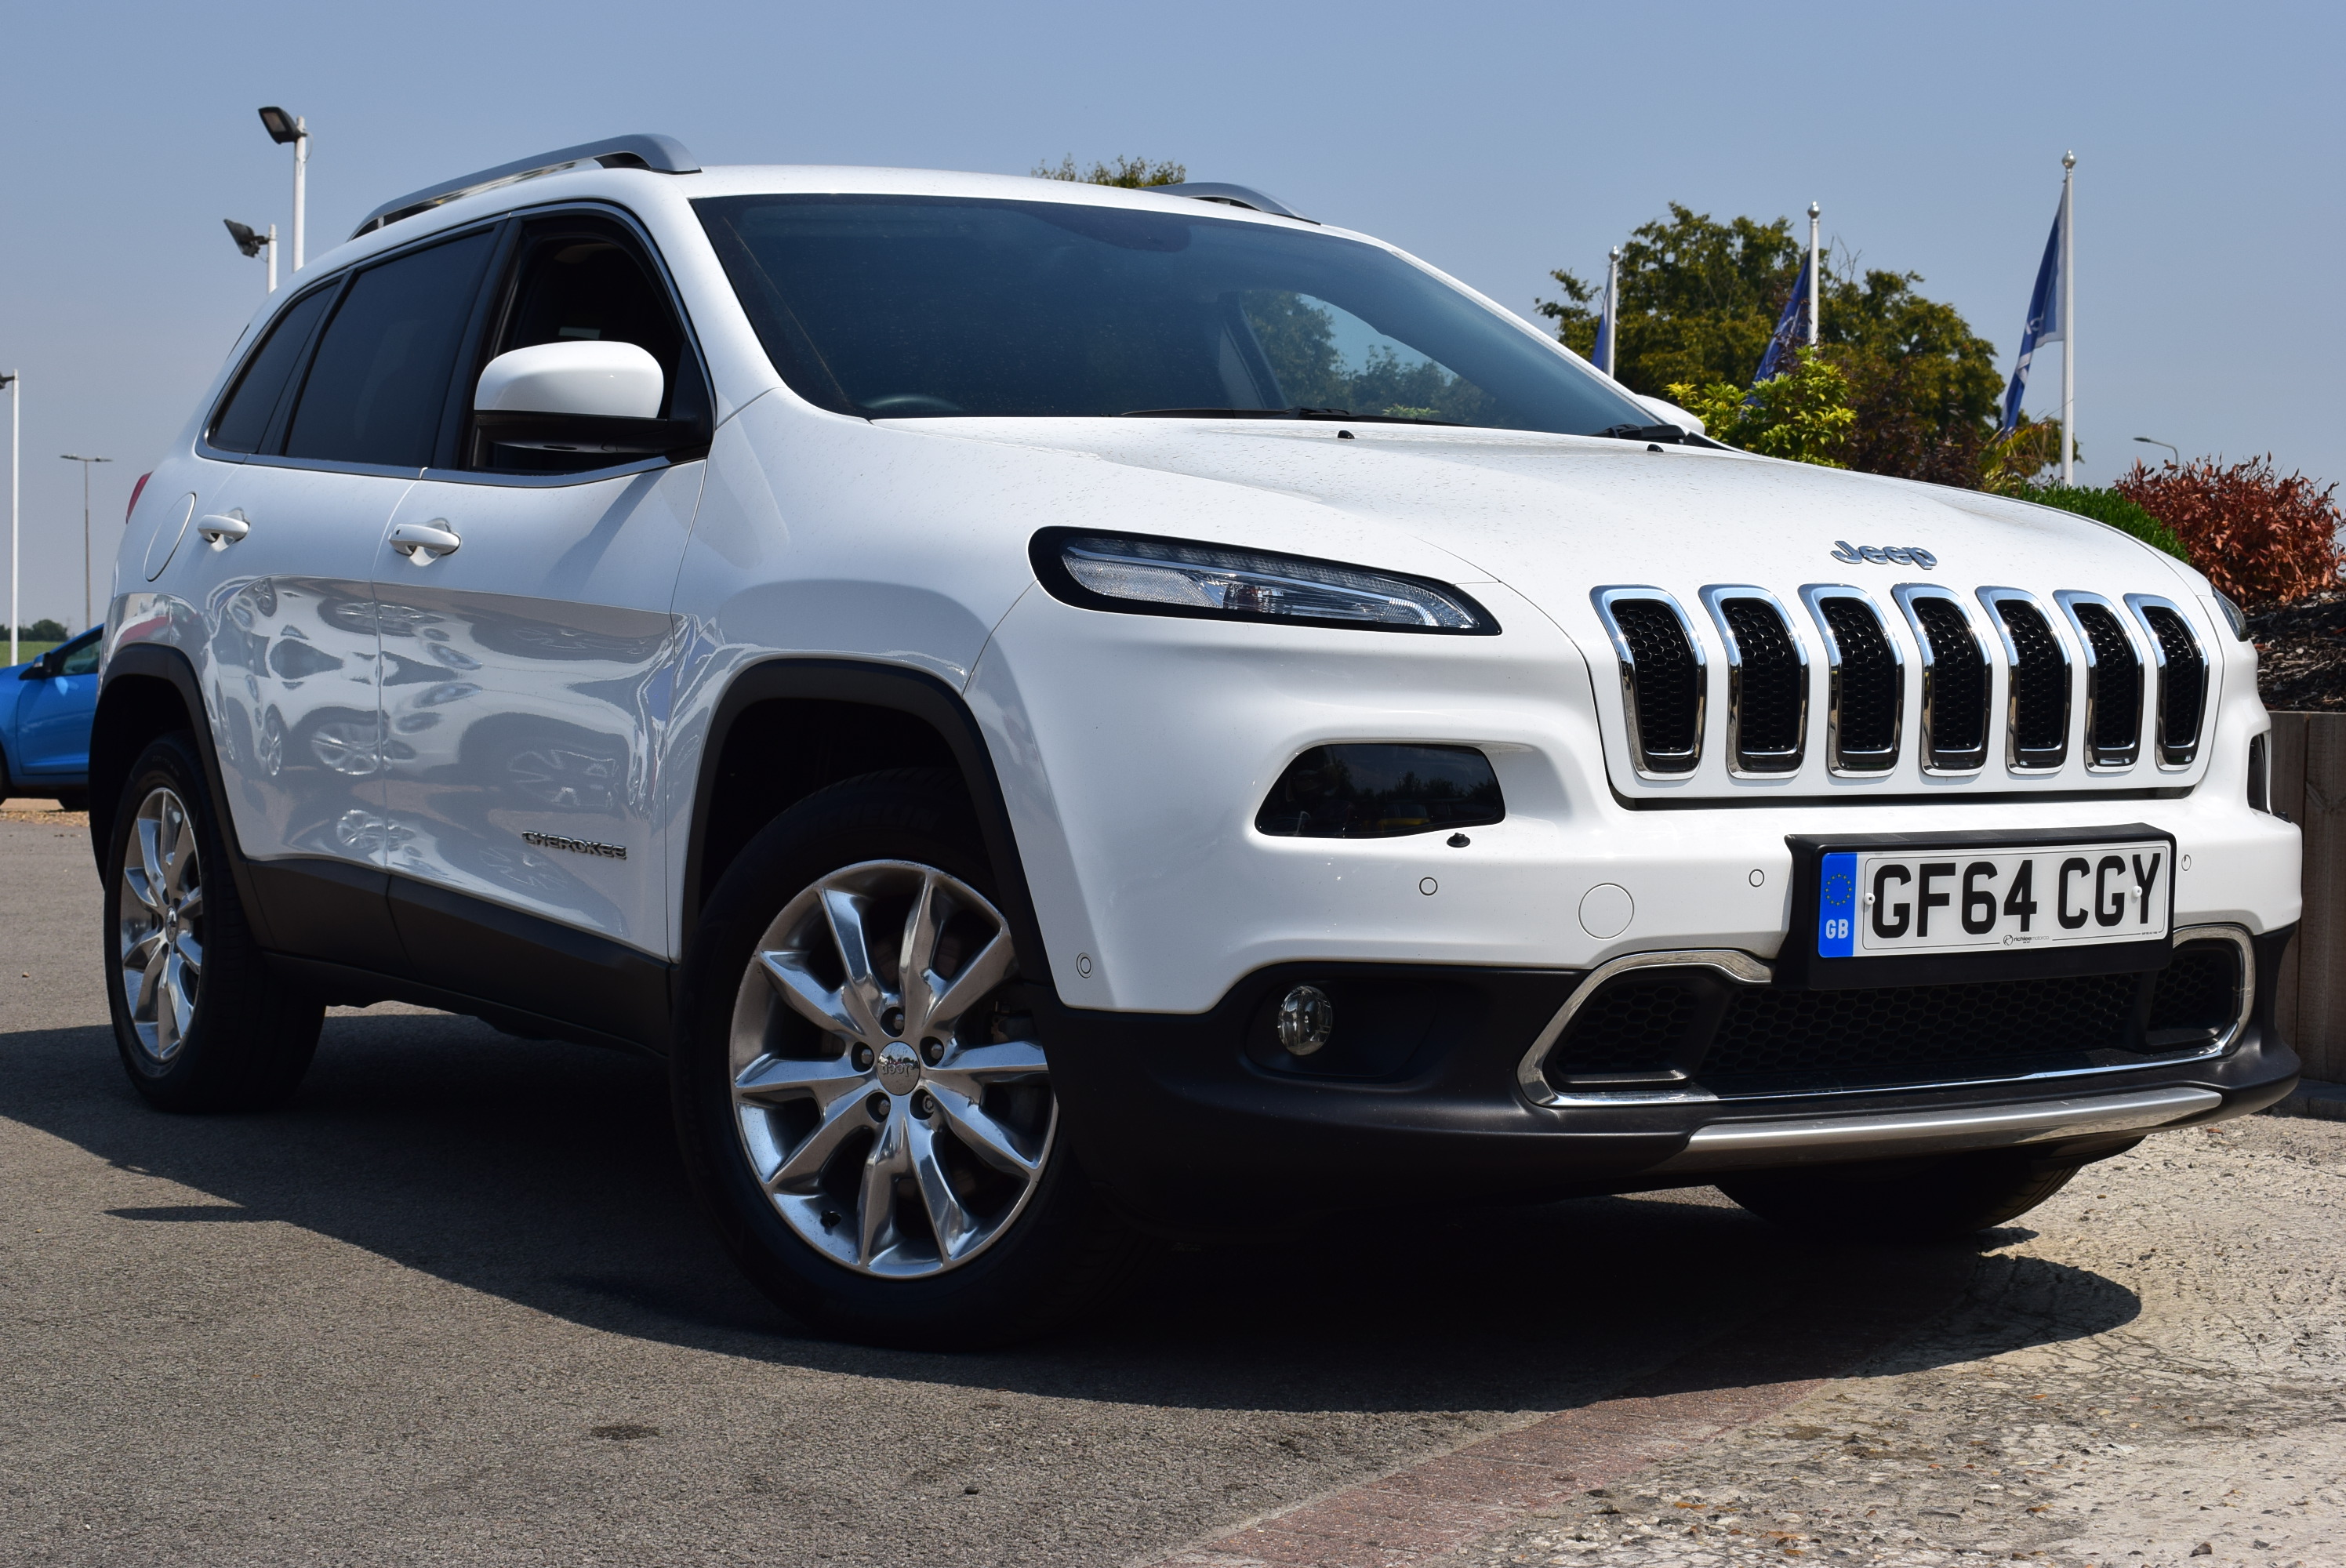 JEEP CHEROKEE 2.0 CRD [170] Limited 5dr Auto For Sale